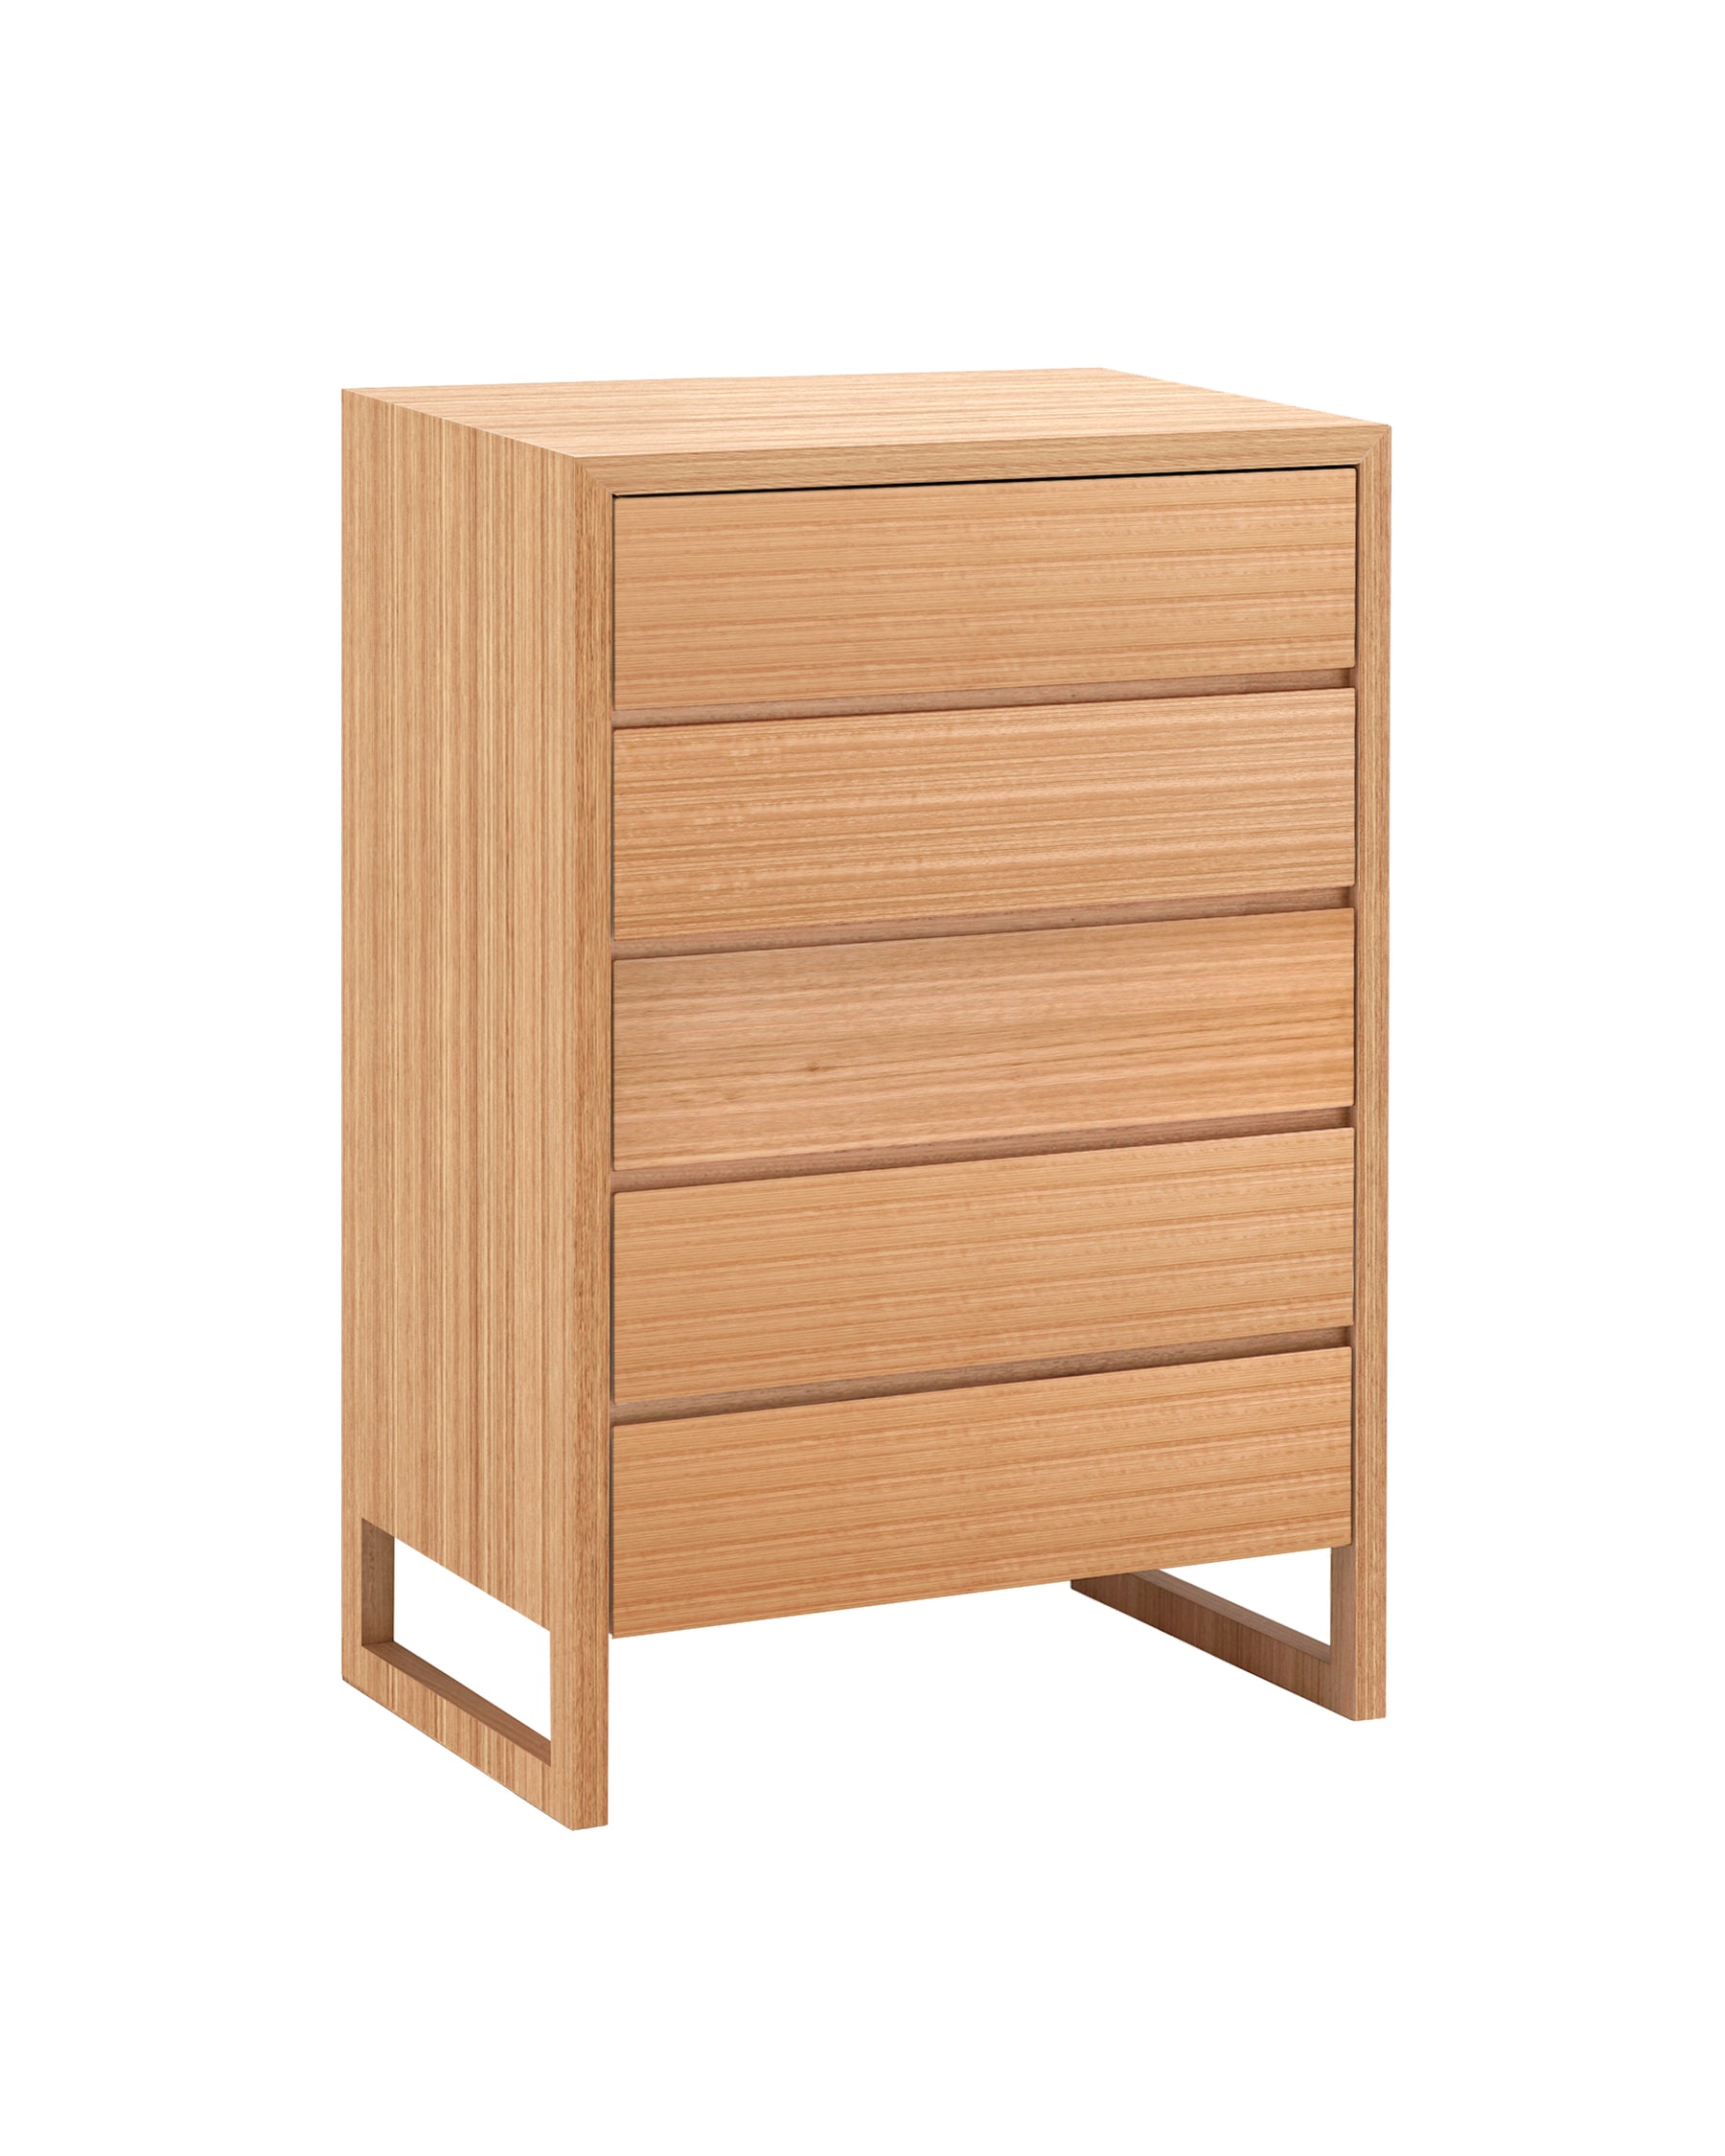 The Oak Box Tallboy features a timber frame which encases itself around five timber drawers, concealing intricate mitred joinery with legs that flow into a continuous wrap to create classic simplicity.